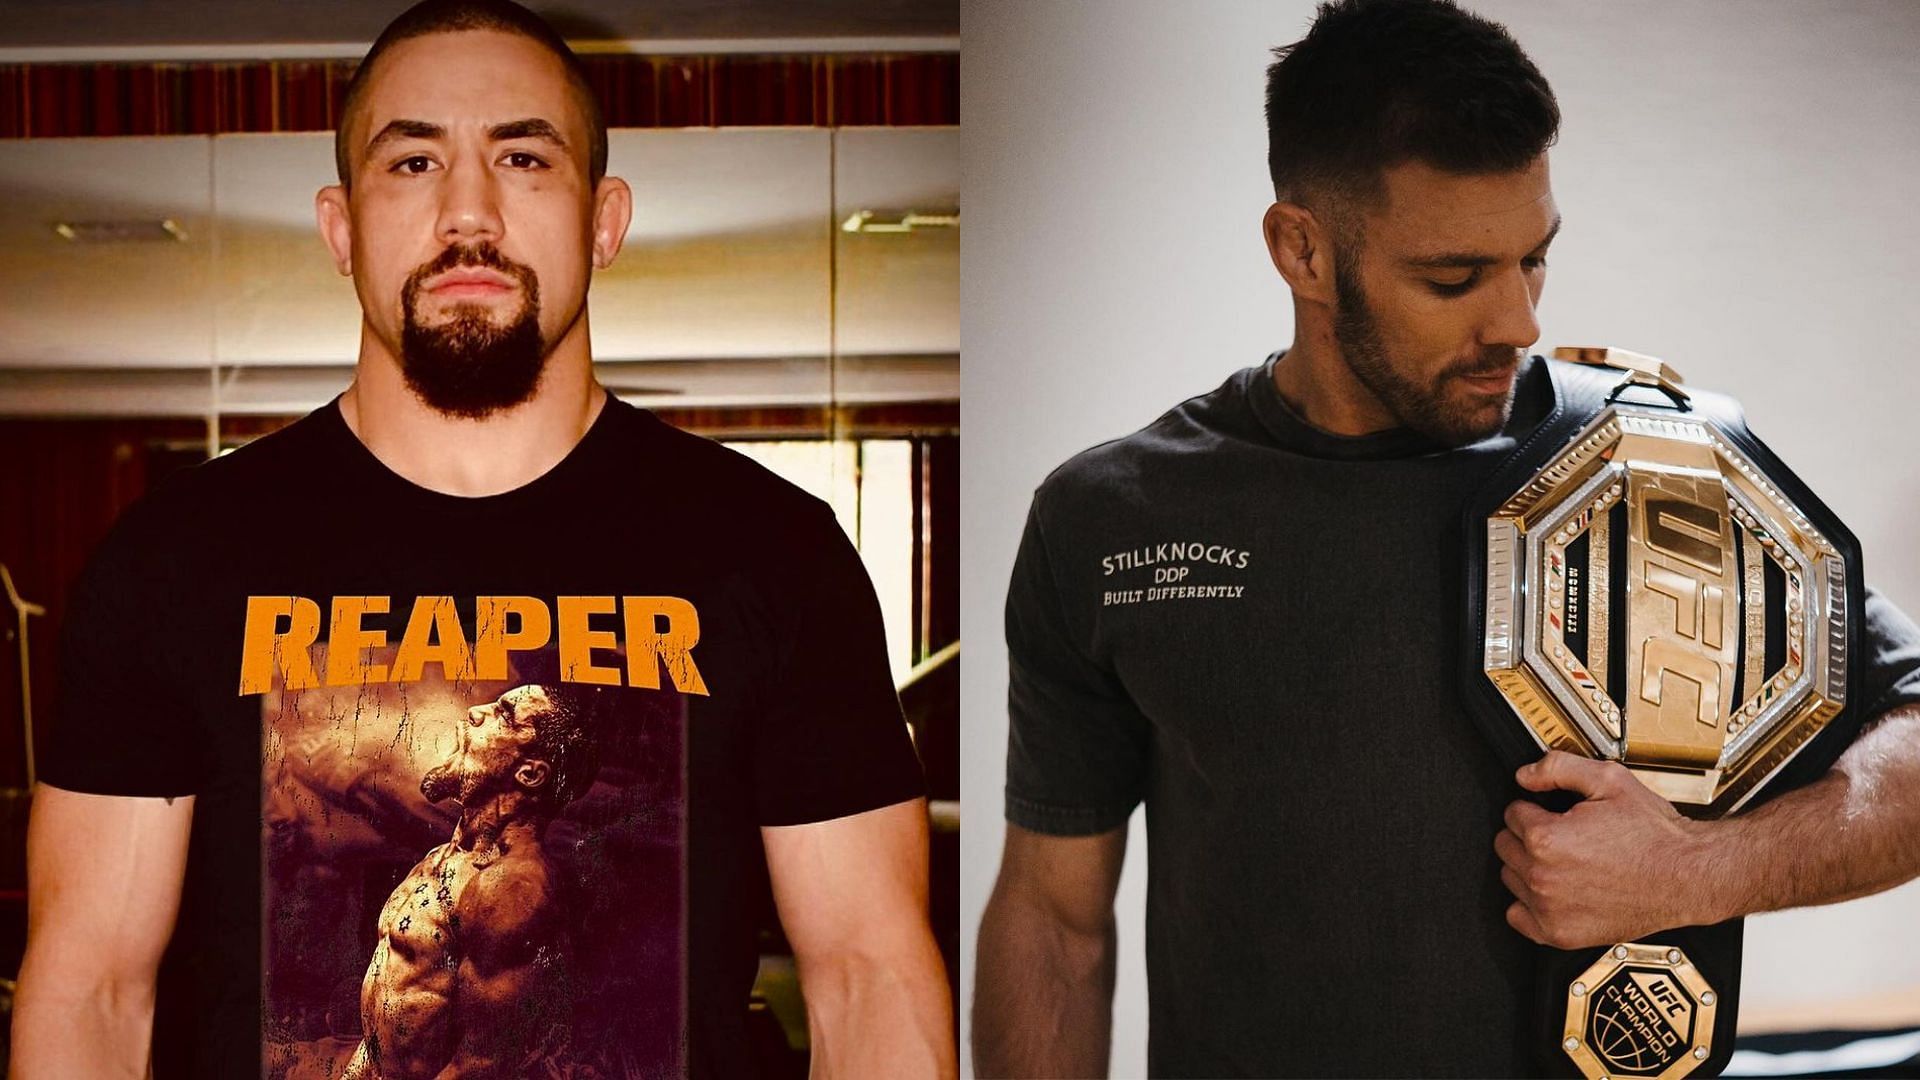 Robert Whittaker (left) believes he is a better fighter than Dricus du Plessis (right) [Image courtesy @robwhittakermma @dricusduplessis on Instagram]